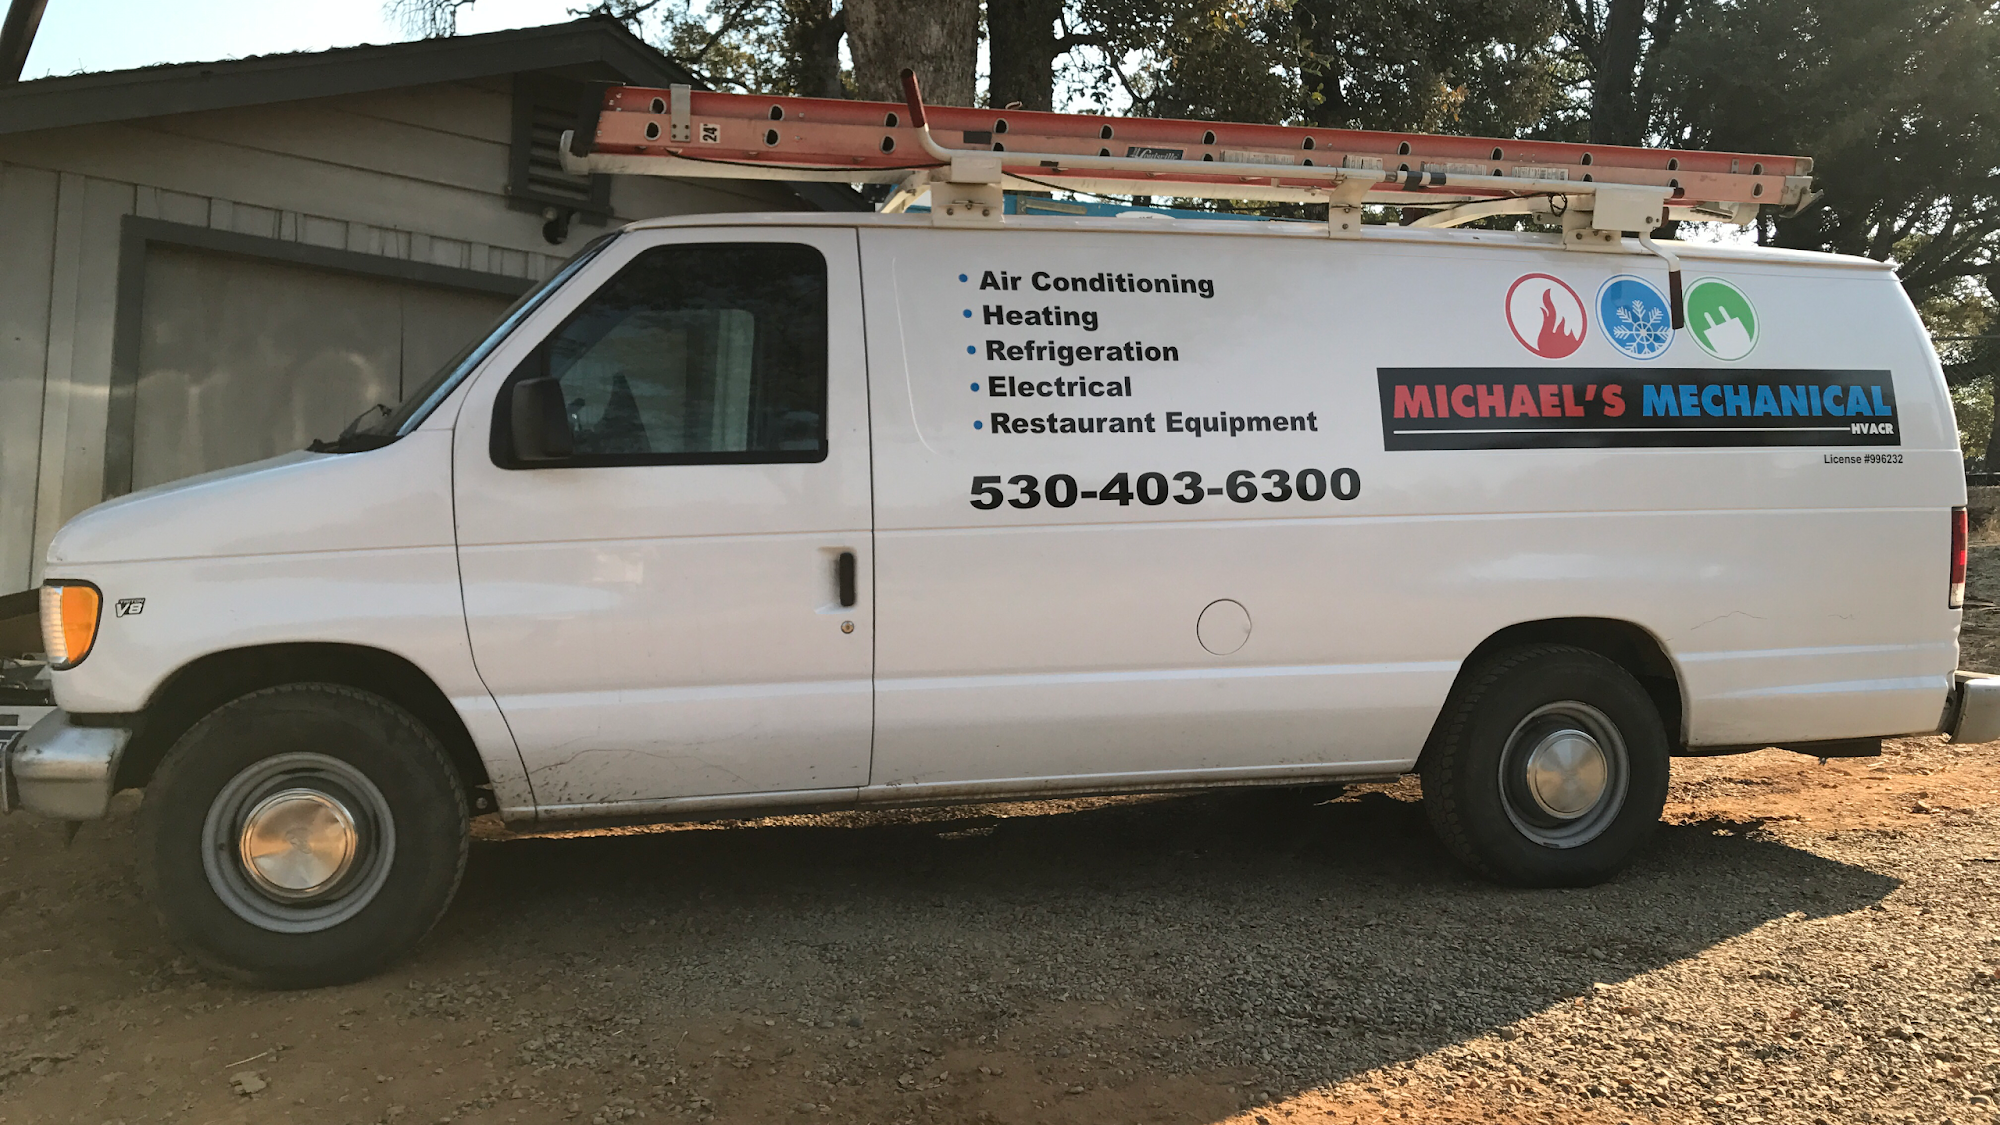 Michael's Mechanical Heating & Air Conditioning